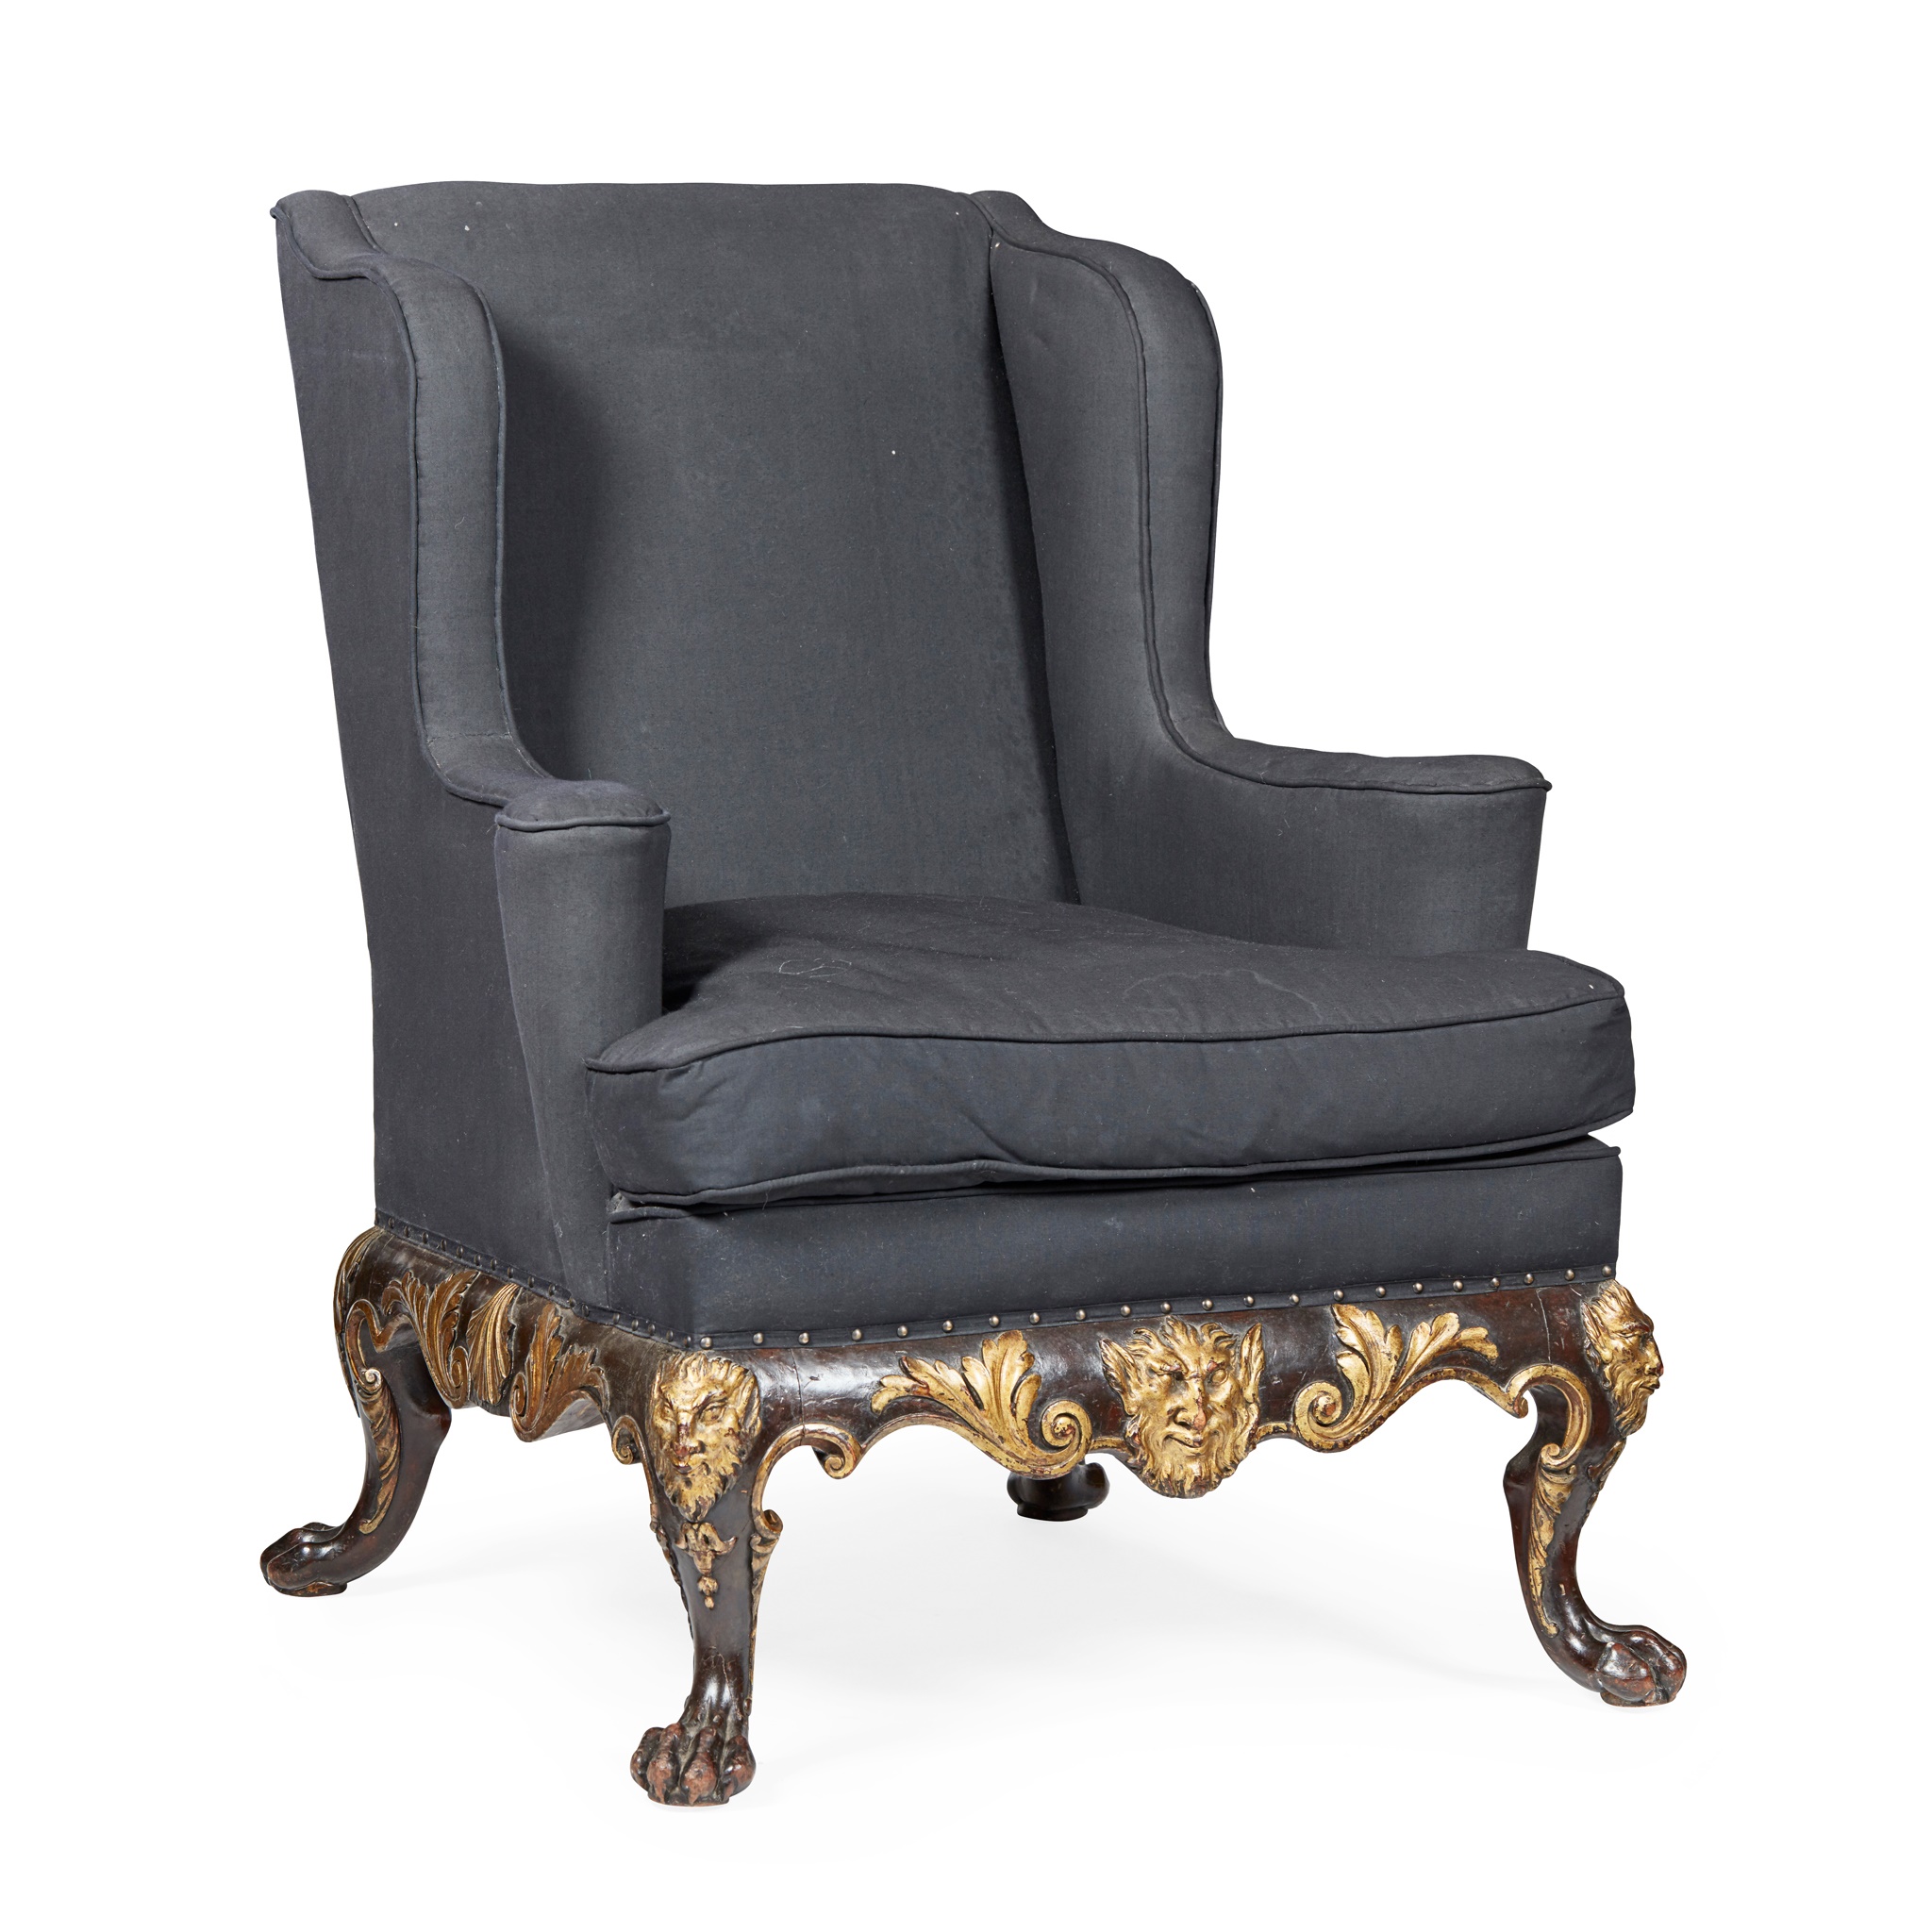 TWO GEORGE II STYLE EBONISED MAHOGANY AND PARCEL GILT WING ARMCHAIRS LATE 19TH/ EARLY 20TH CENTURY - Image 6 of 6